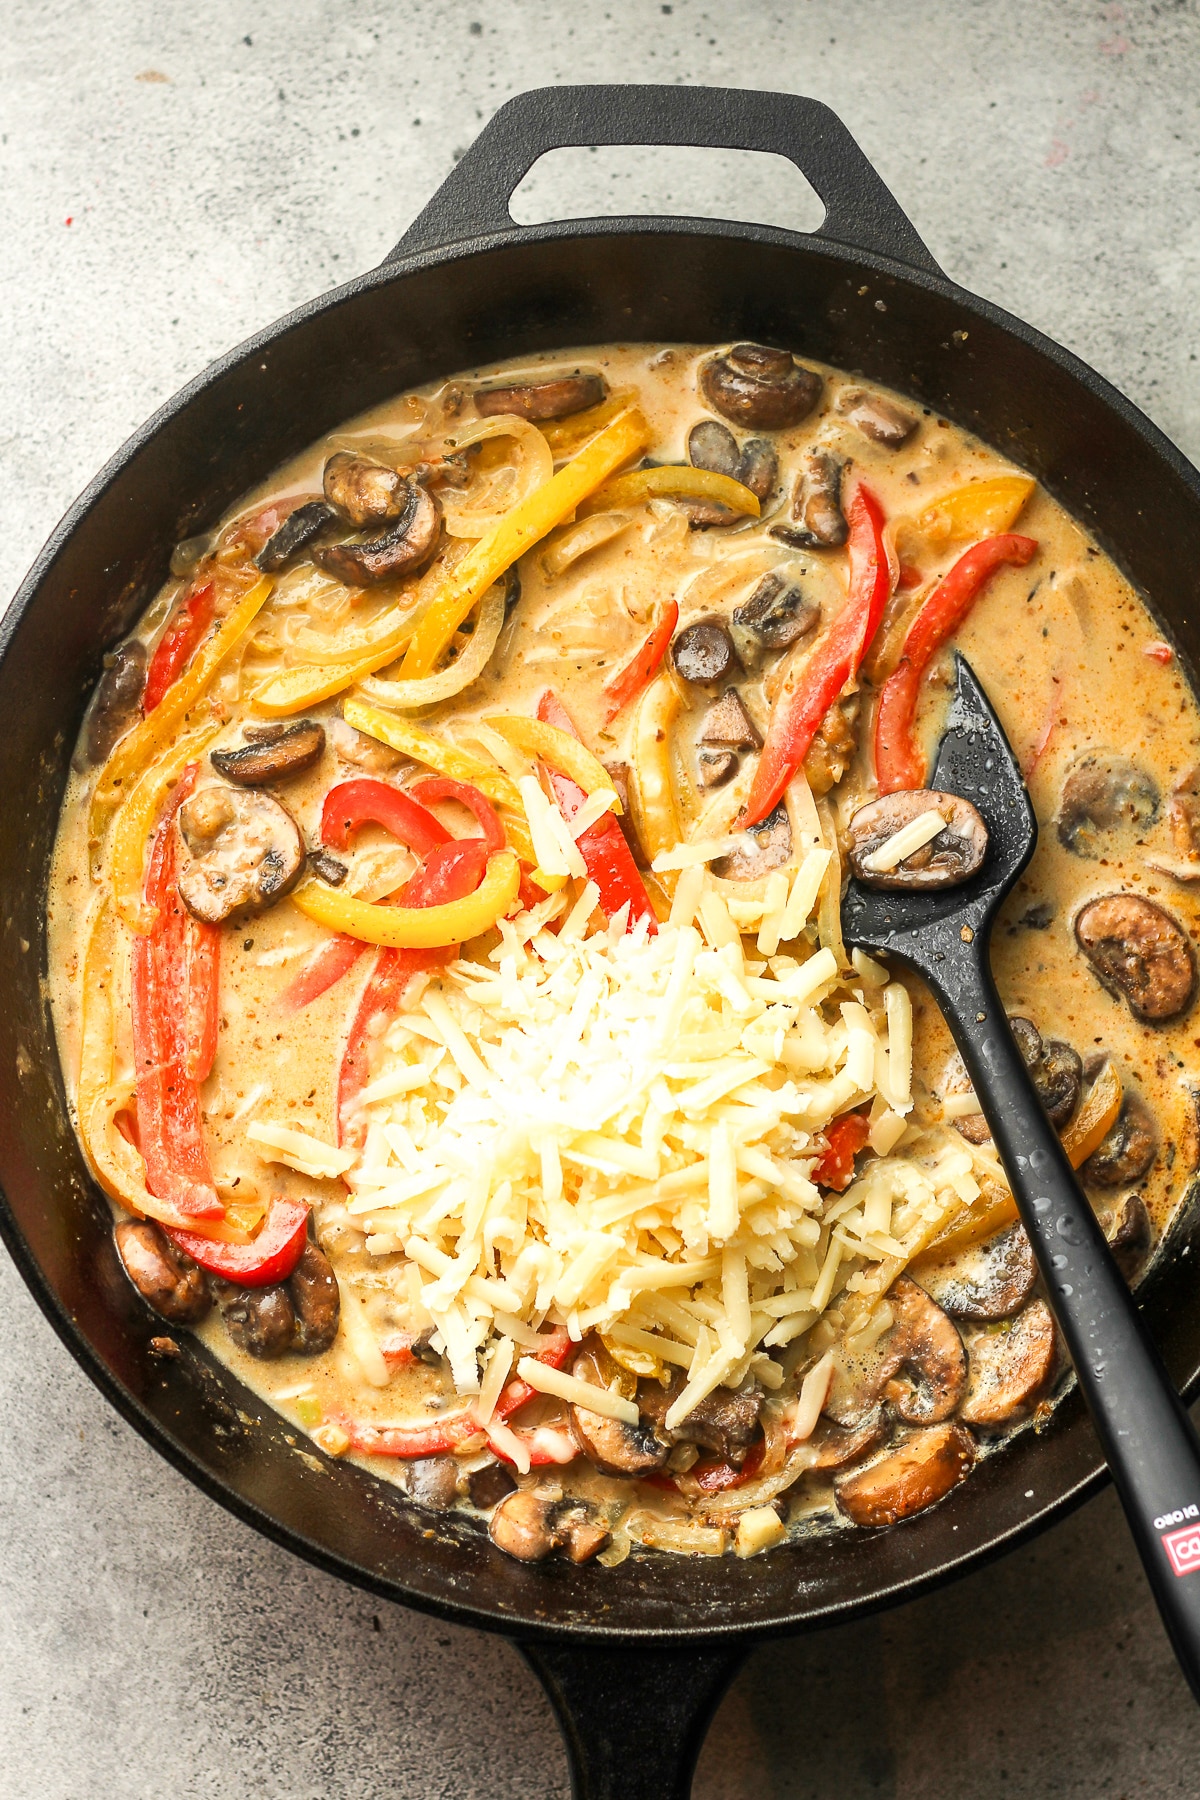 A skillet of the creamy sauce and veggies plus parmesan cheese on top.